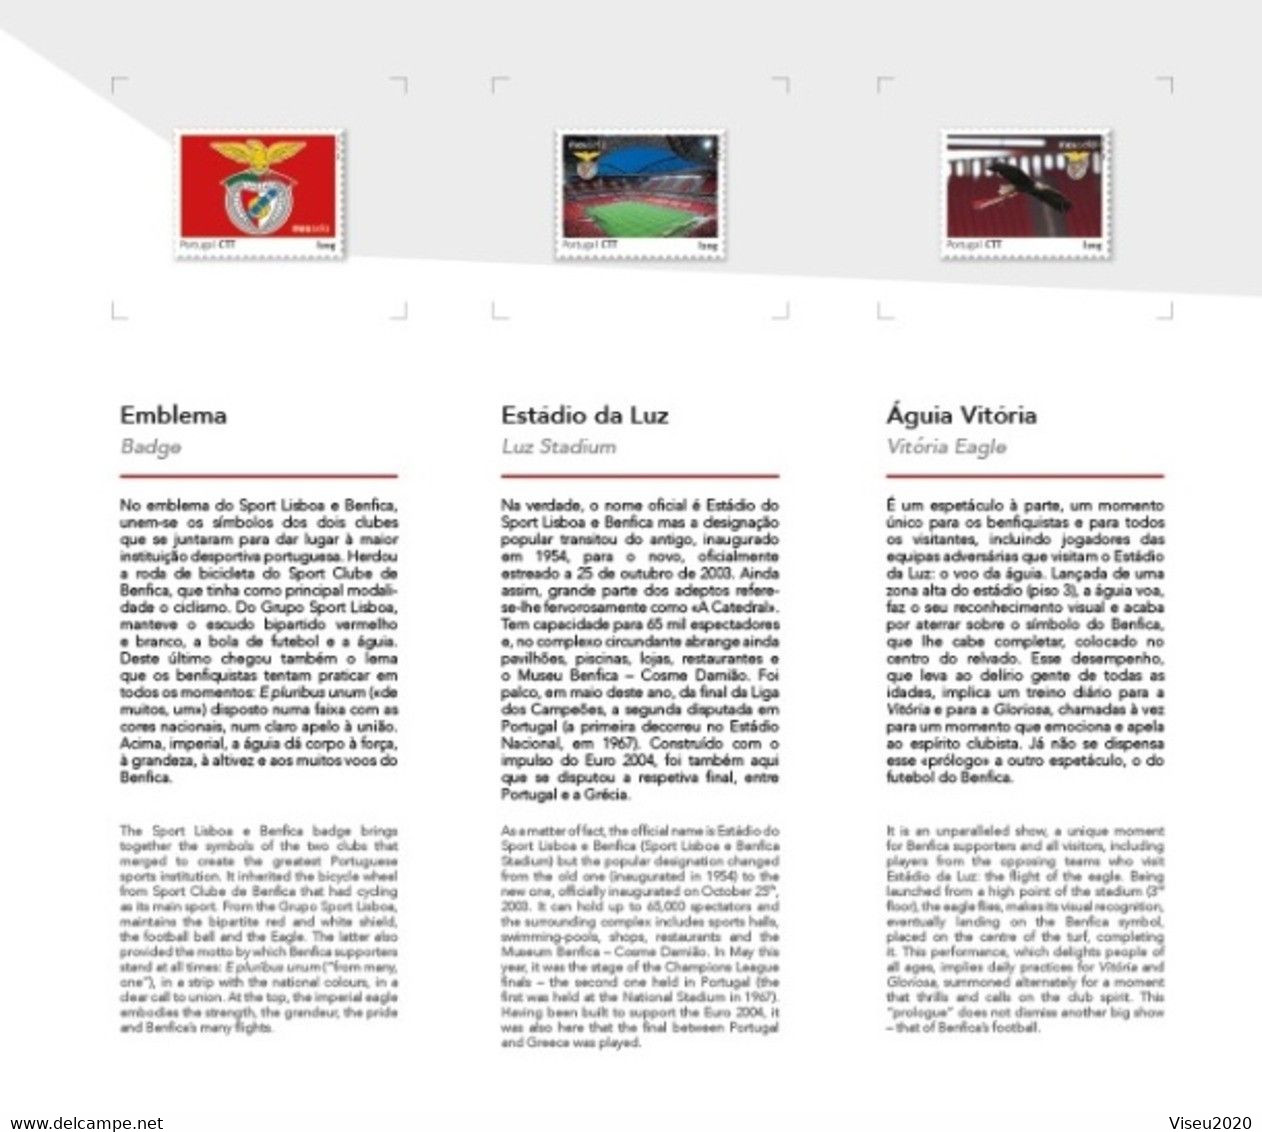 Portugal 2014 My Benfica 2014 - LIVRO TEMATICO CTT - Book Of The Year